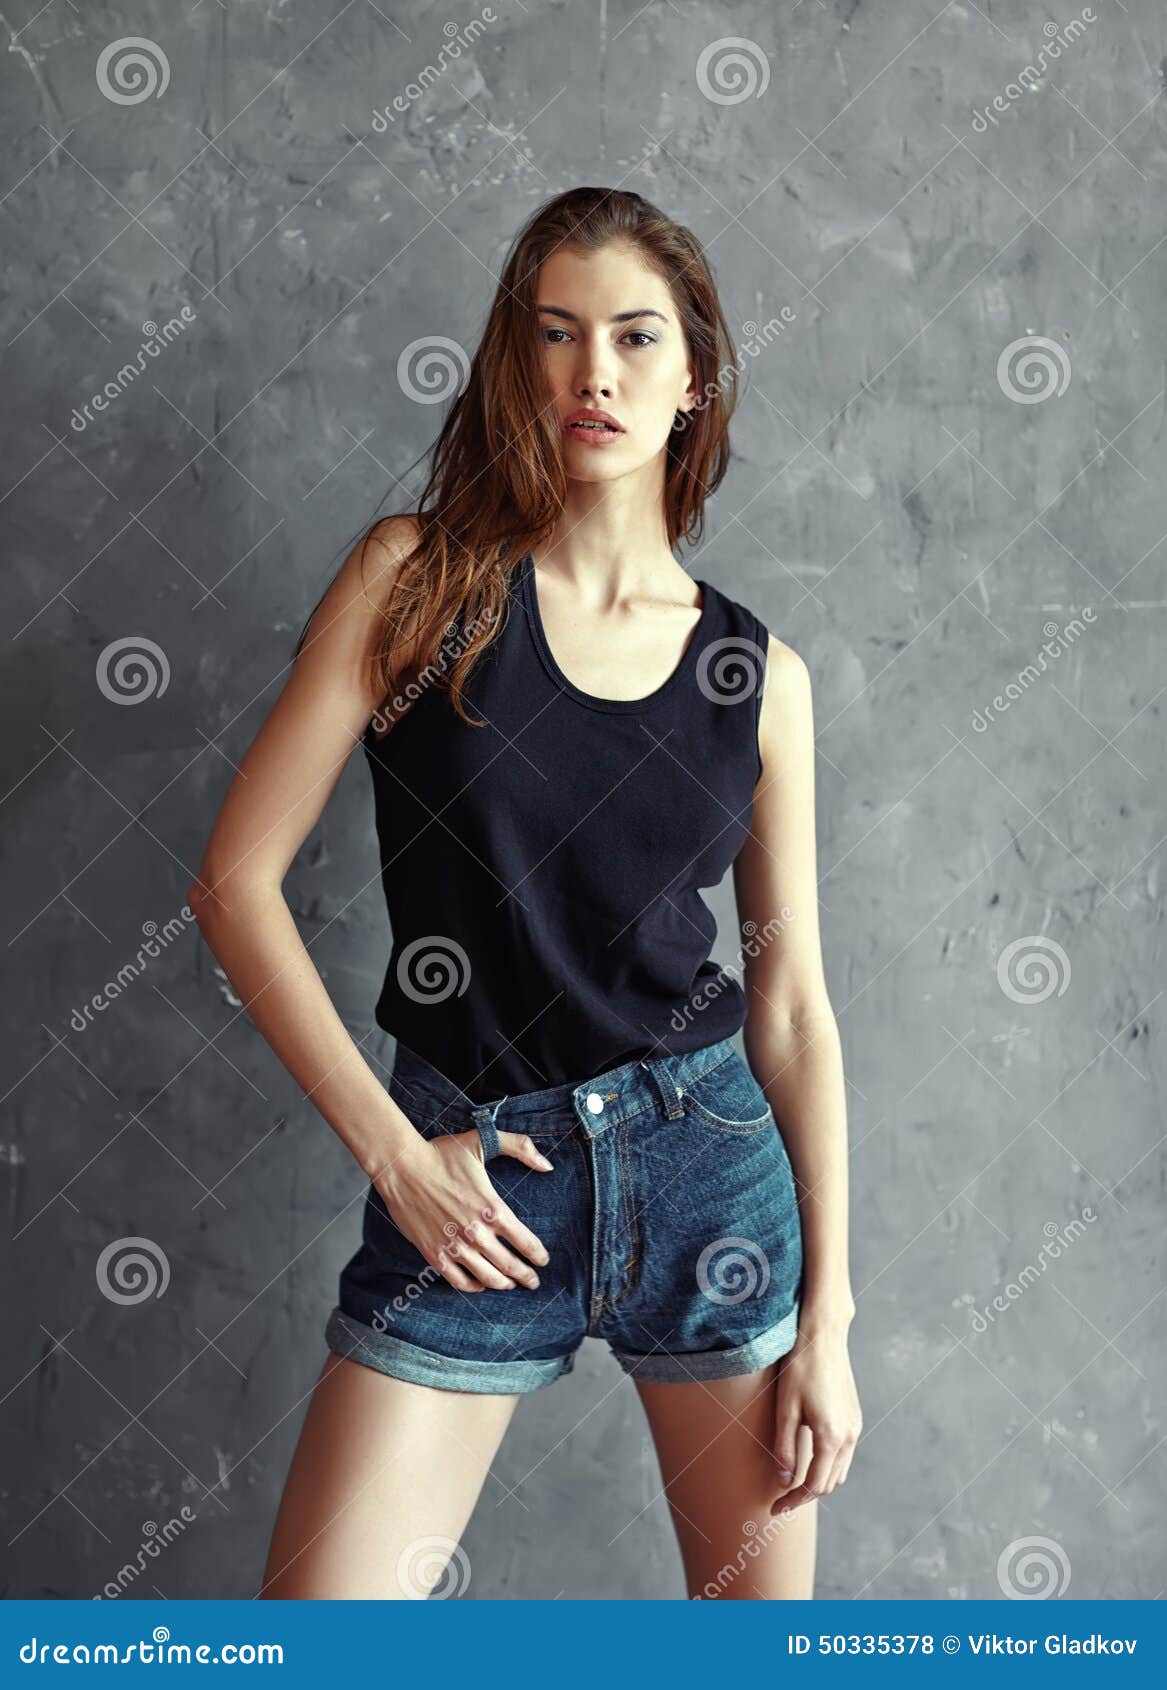 Fashion Young Woman on Grunge Wall Background Stock Photo - Image of ...